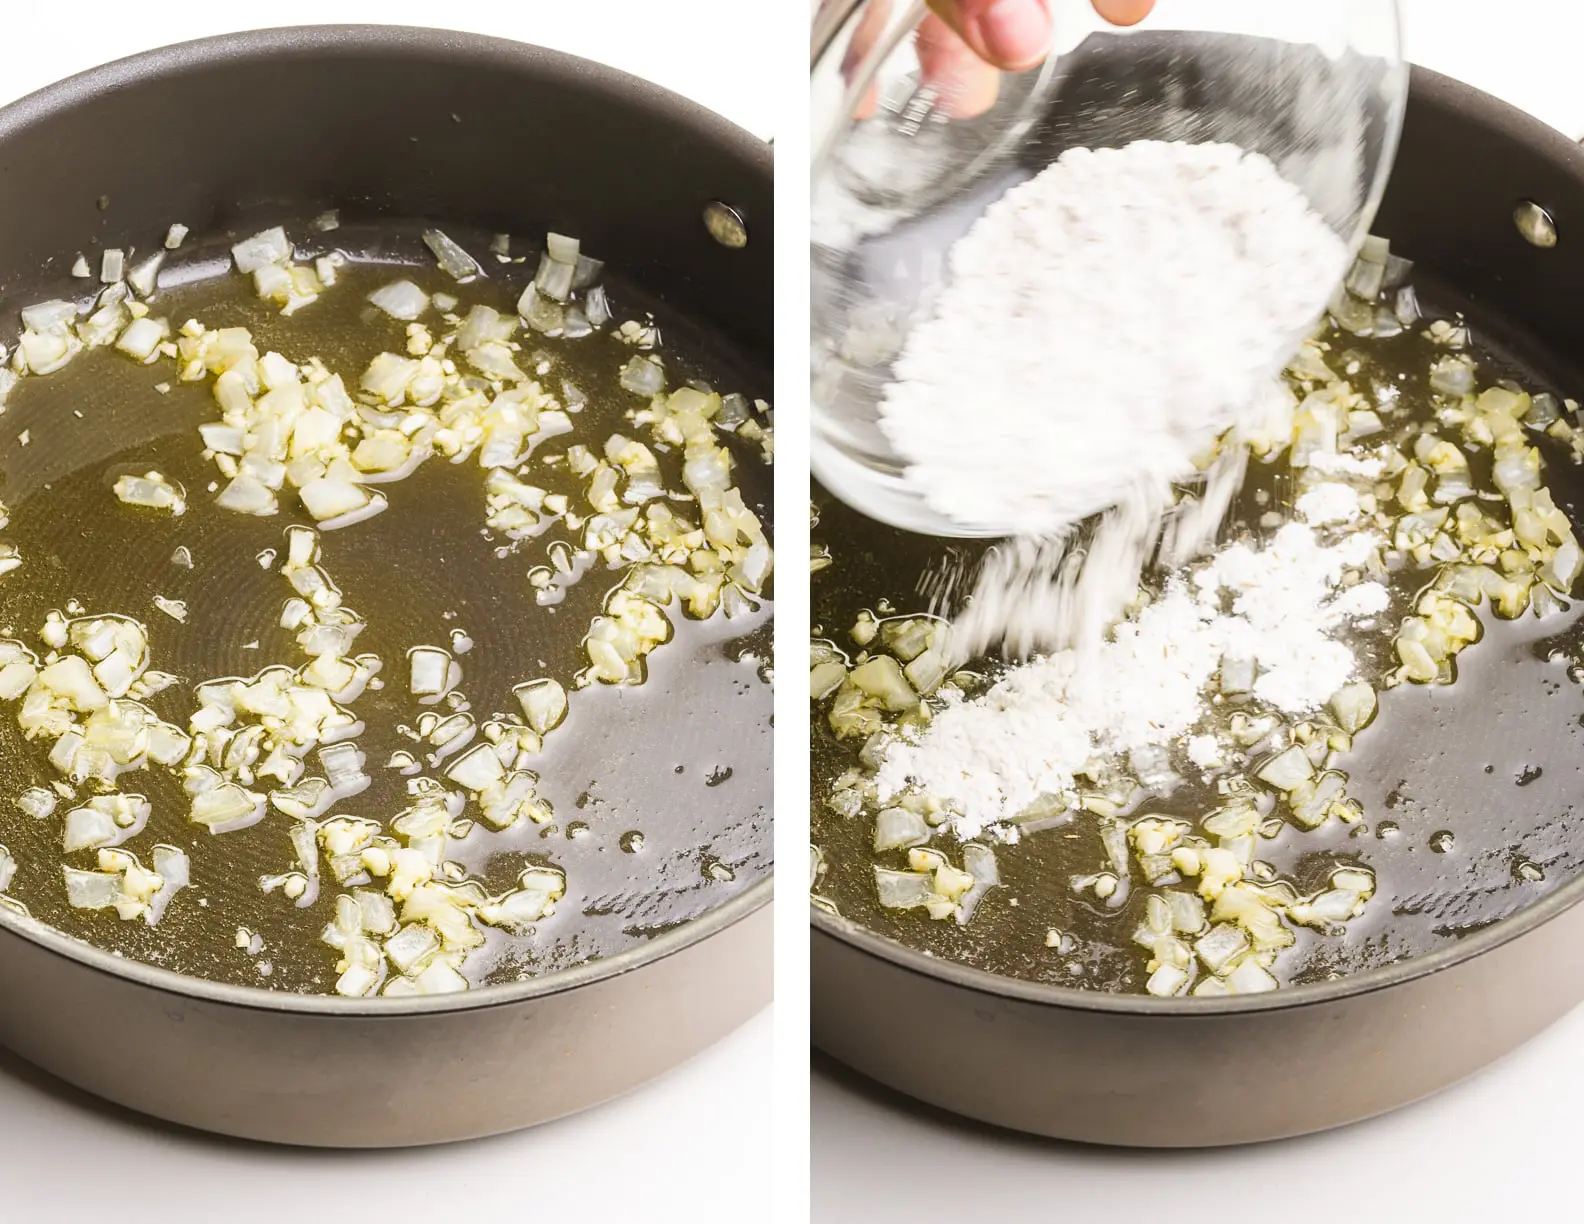 A collage of 2 images shows onions cooking in oil on one side and flour being poured into that mixture on the right.